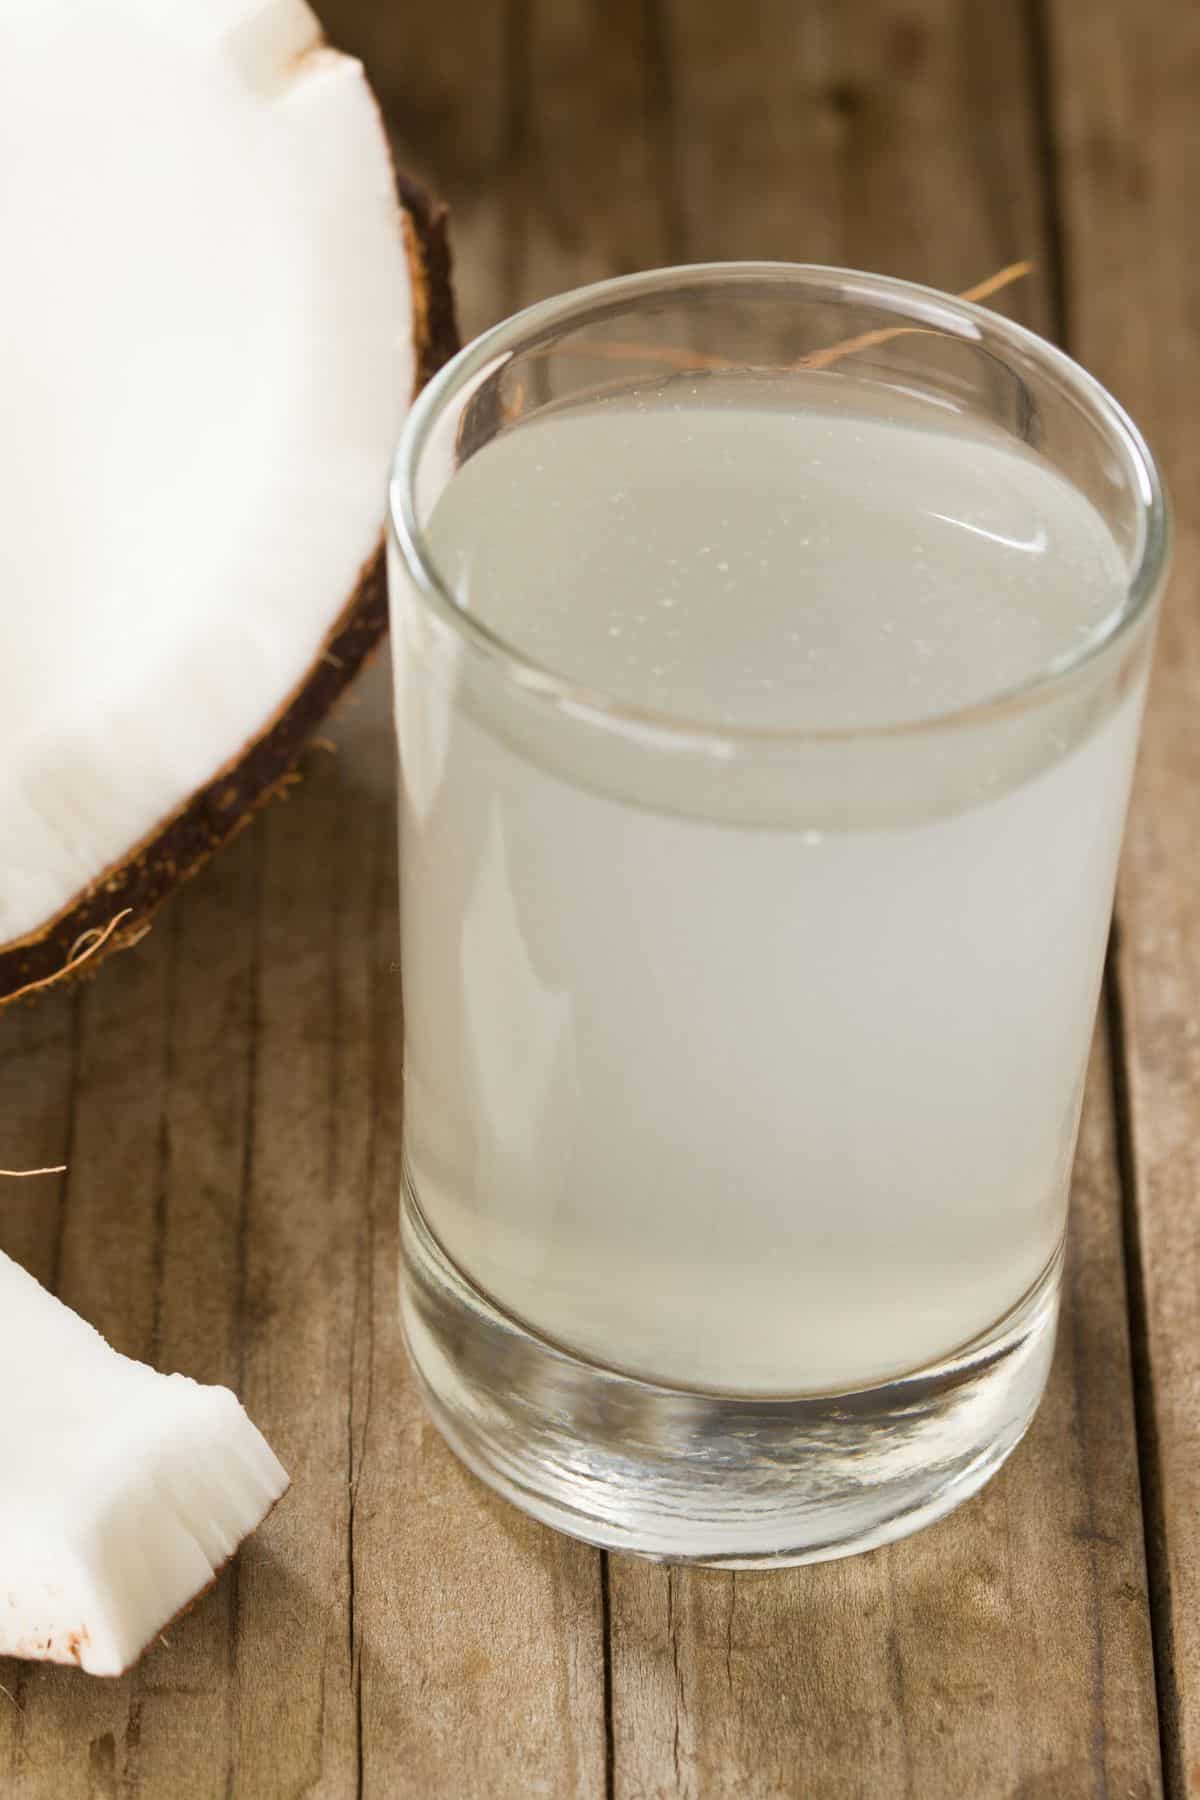 A glass of coconut water next to a fresh coconut on a wooden table.